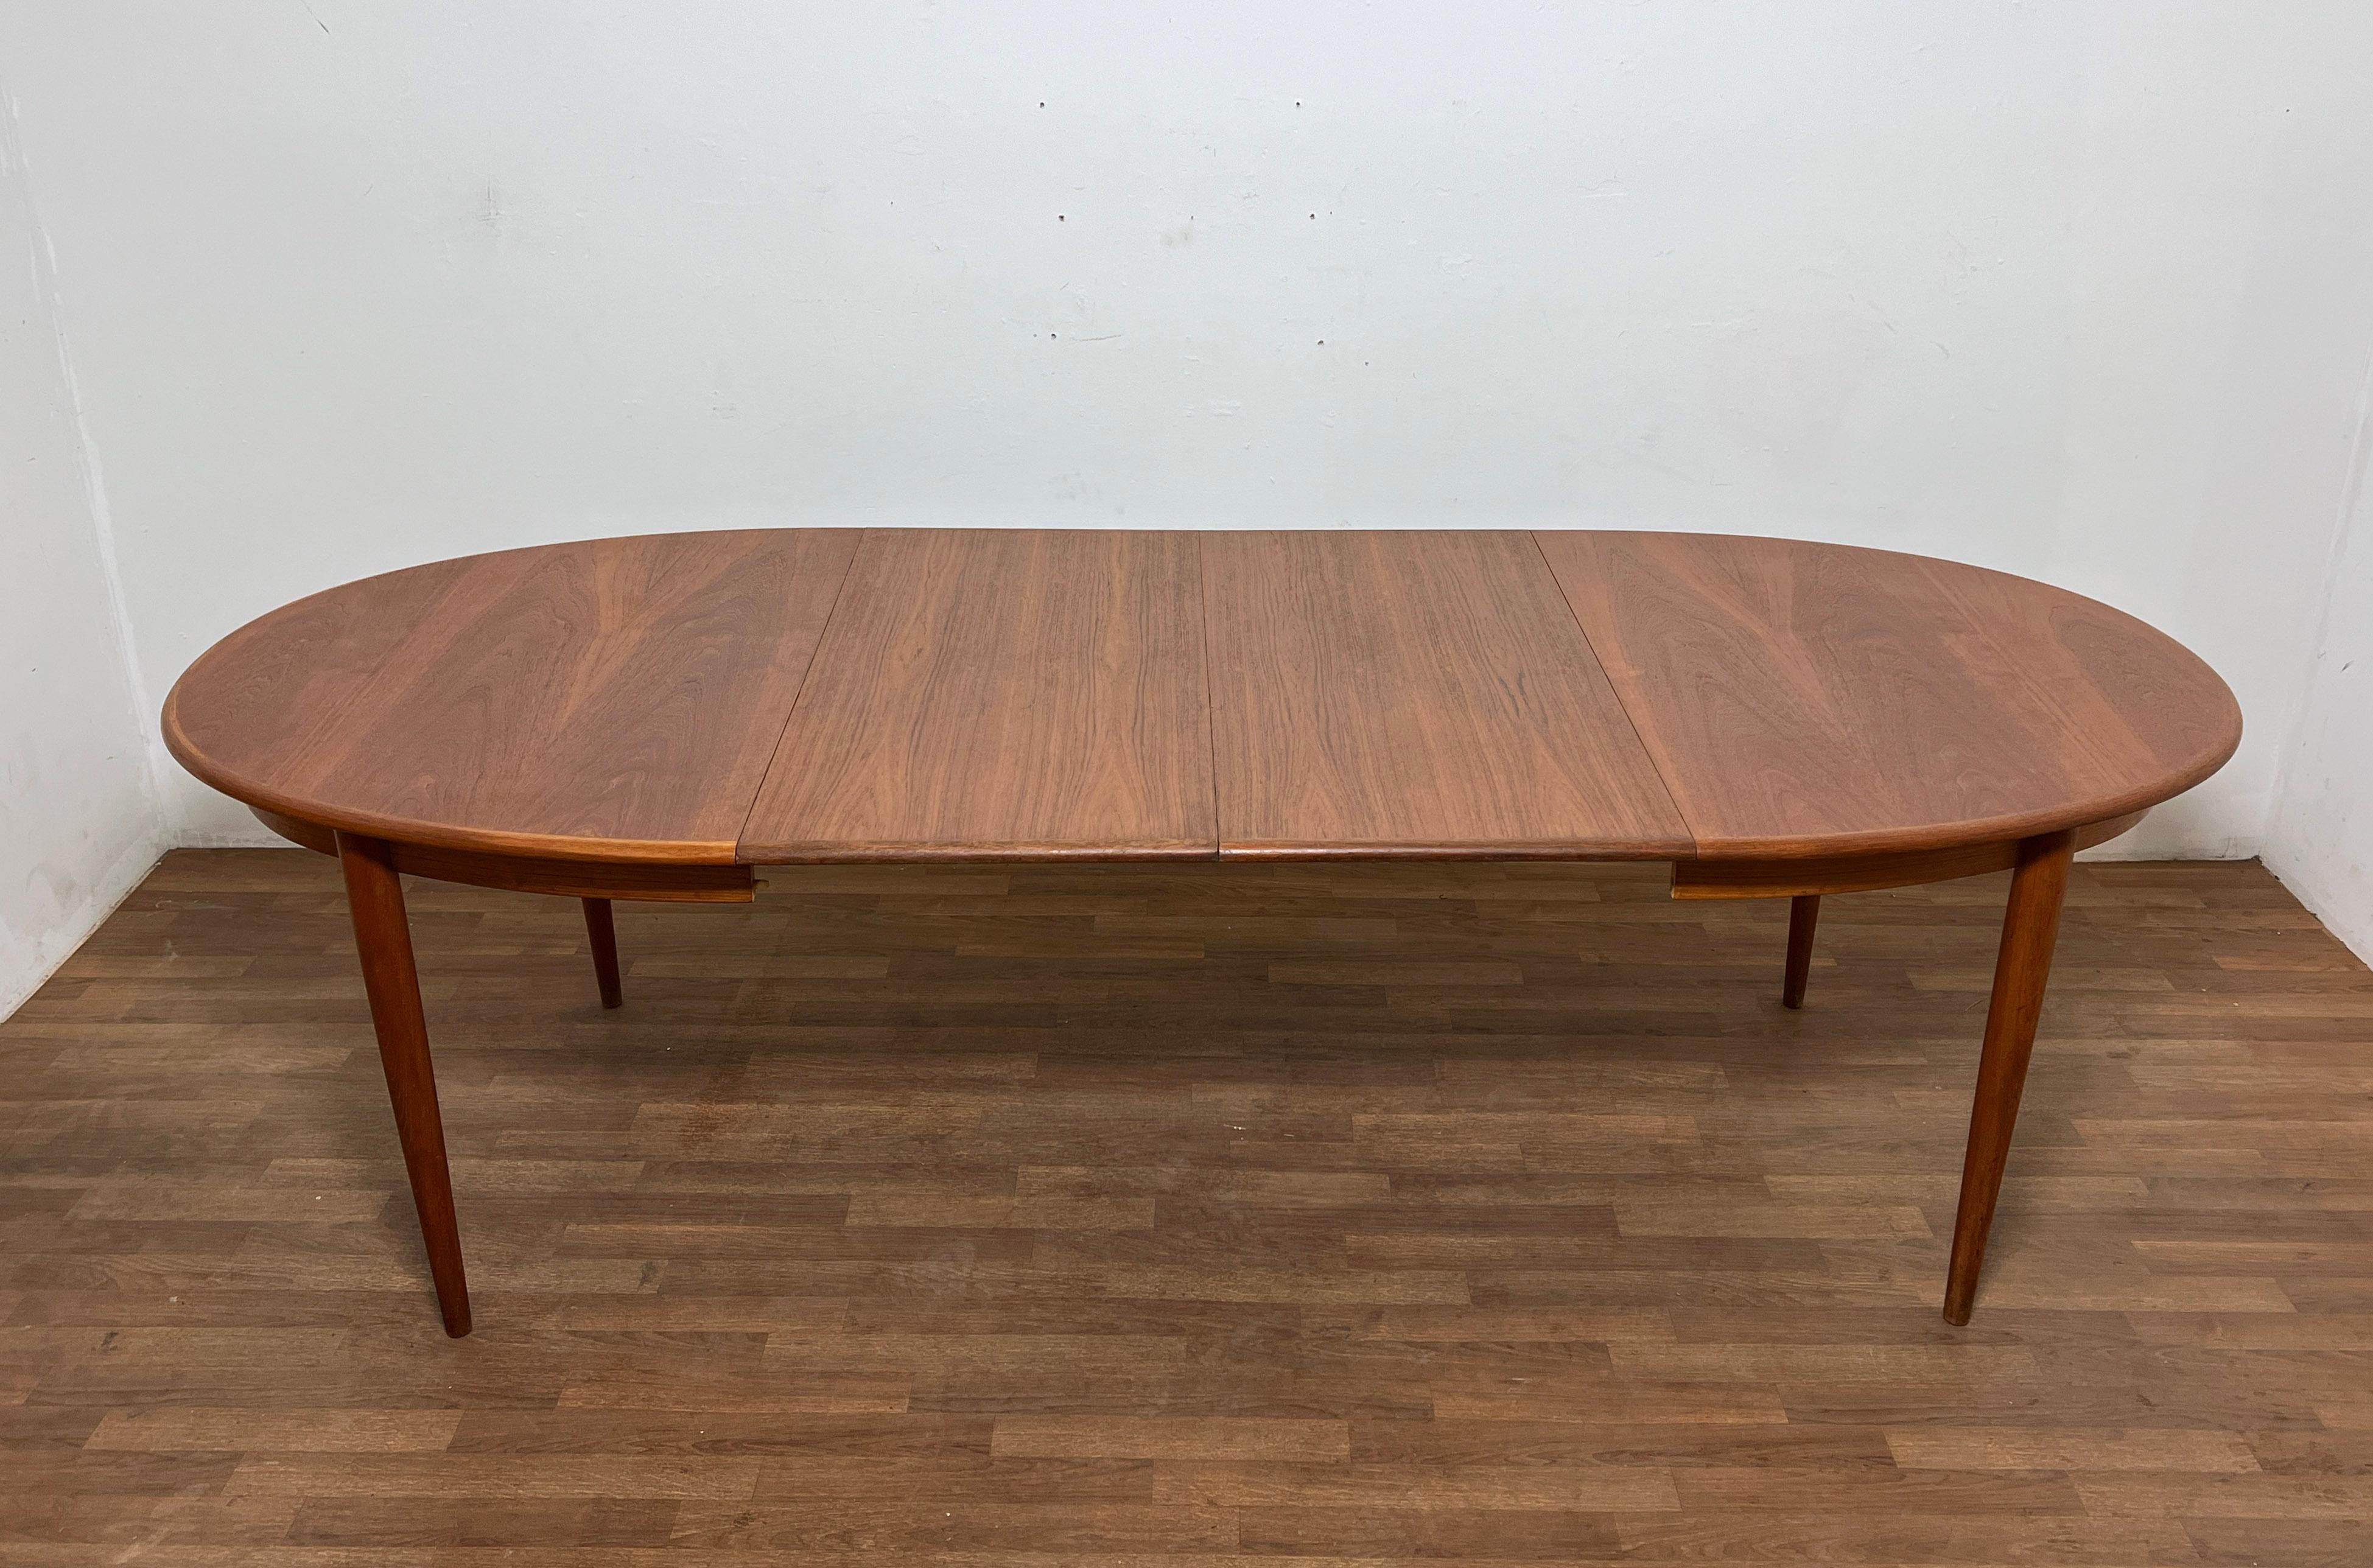 Mid-20th Century Danish Teak Oval Dining Table With Two Leaves by Gudme, Circa 1960s